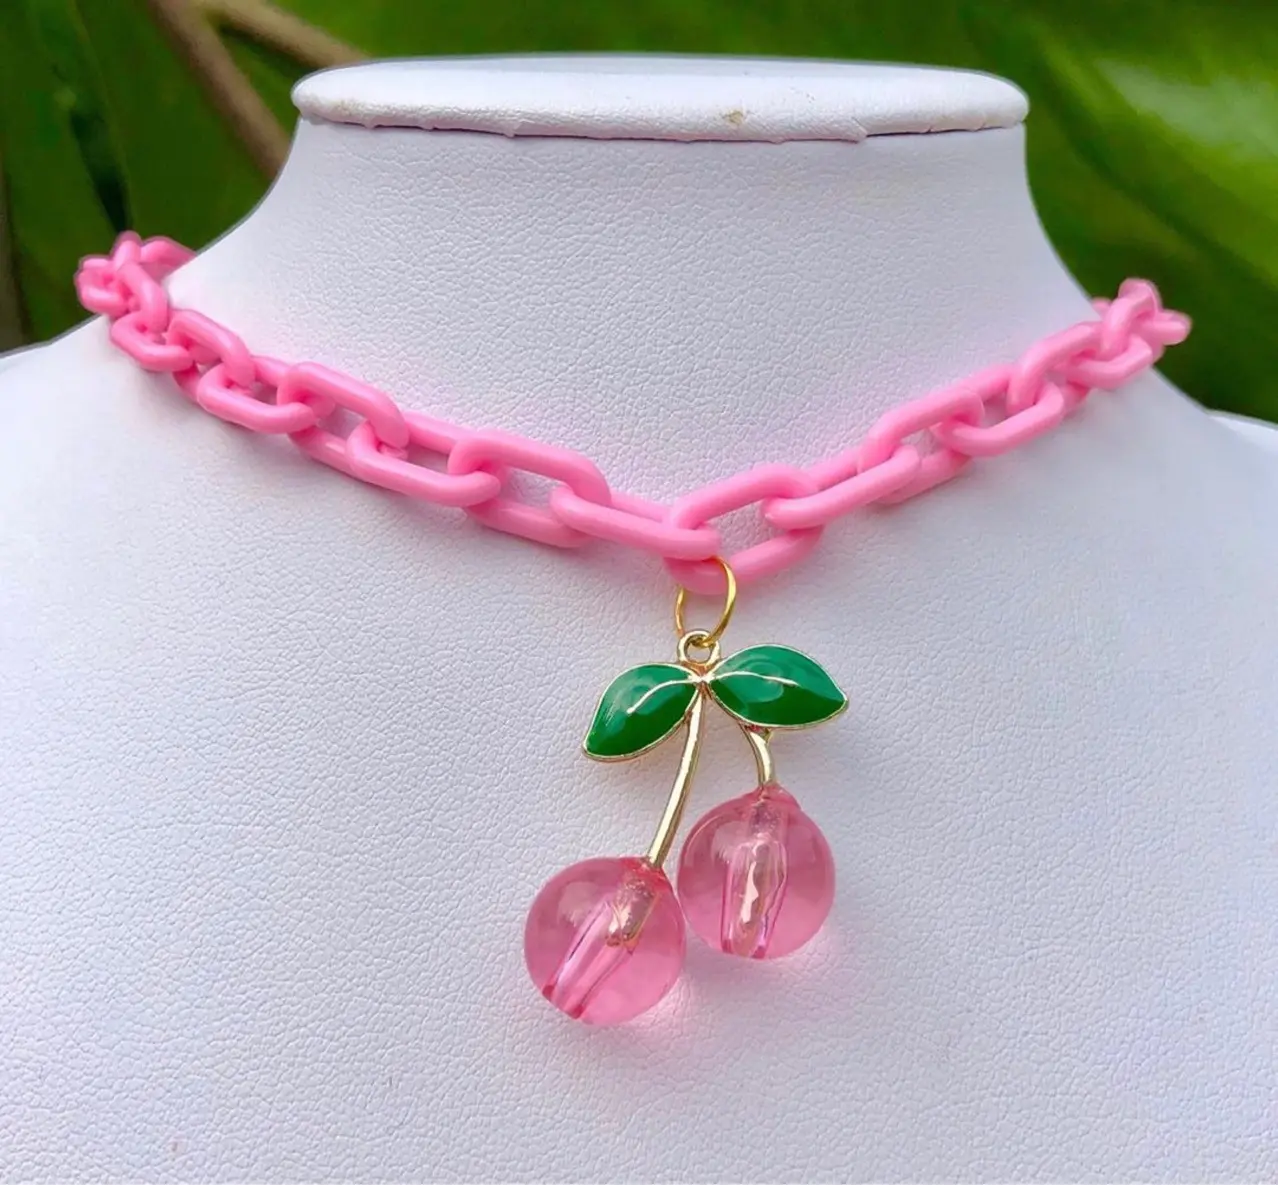 Tik Tok Cute Pink Girly Fairy Cherry Necklace Fashion Chunky Chain Necklace Cool Resin Acrylic Chain Necklace for Women